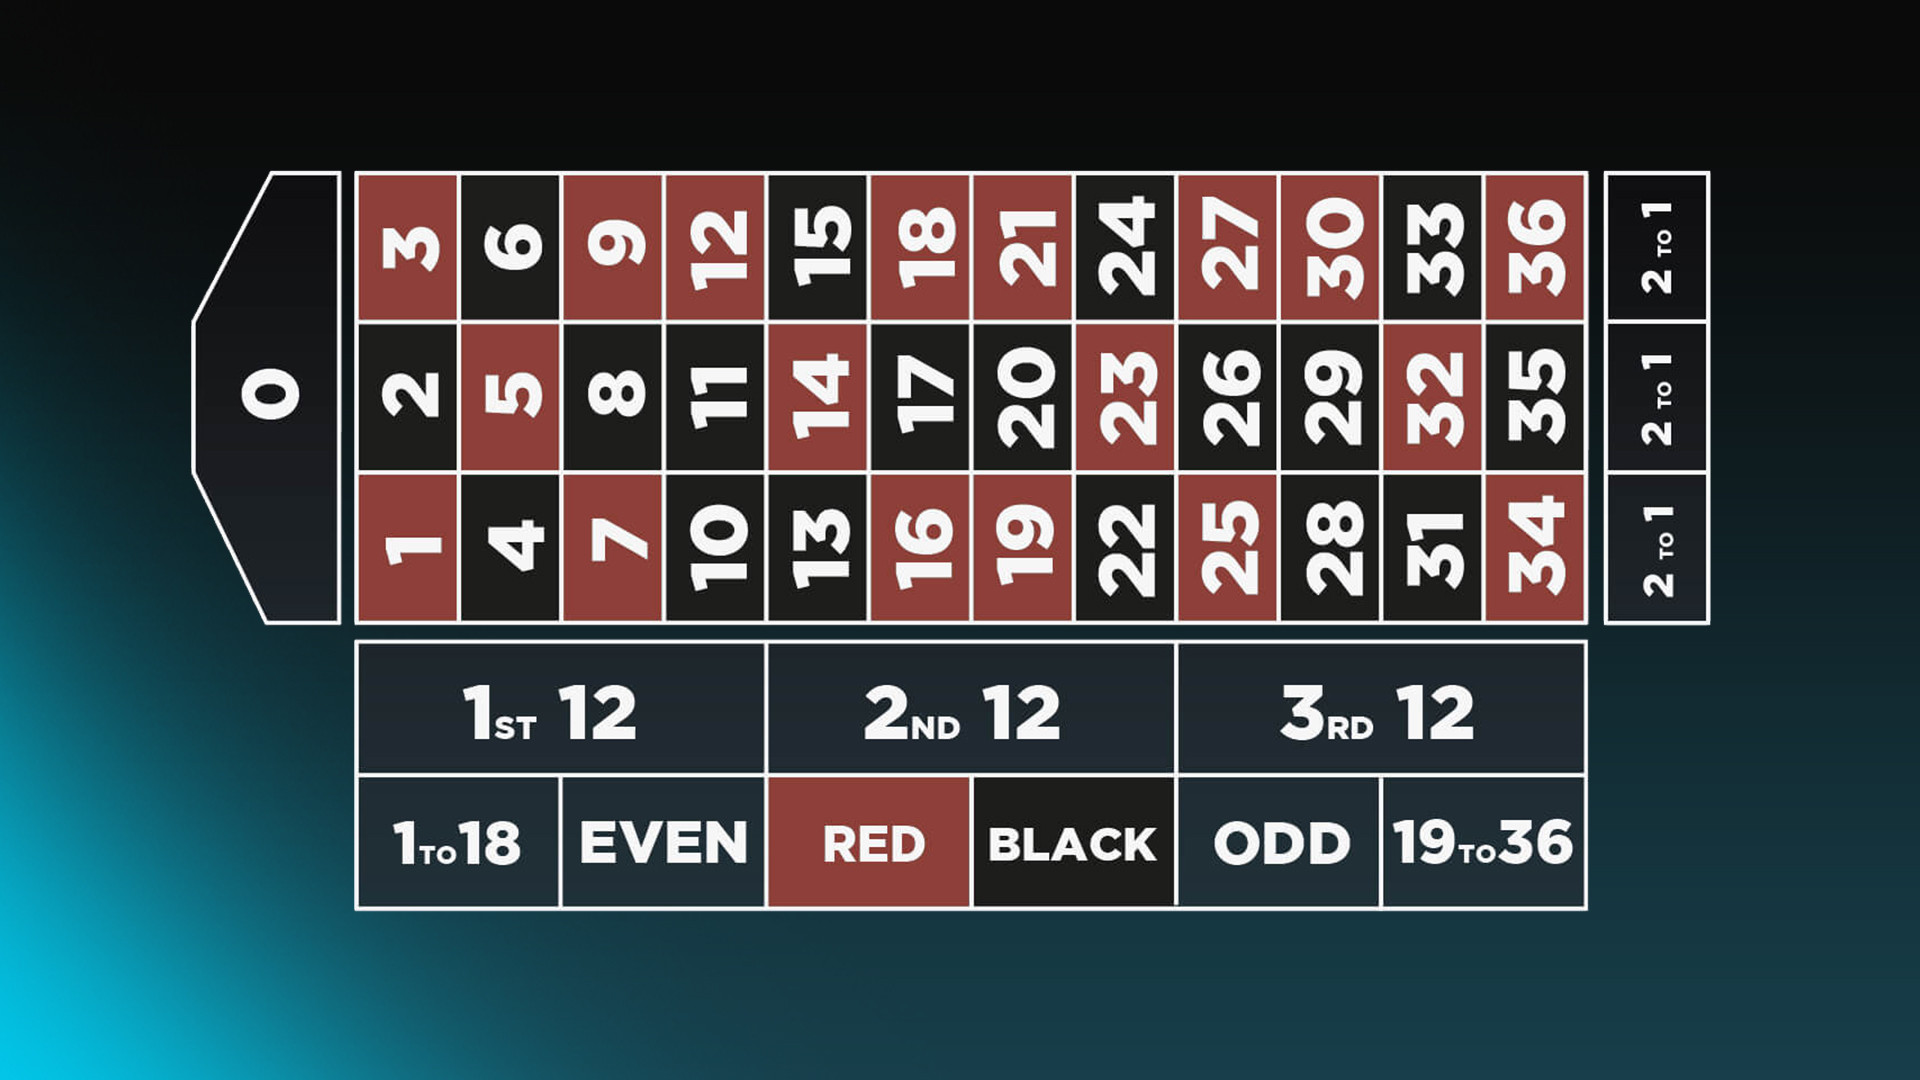 Example of a number board in roulette